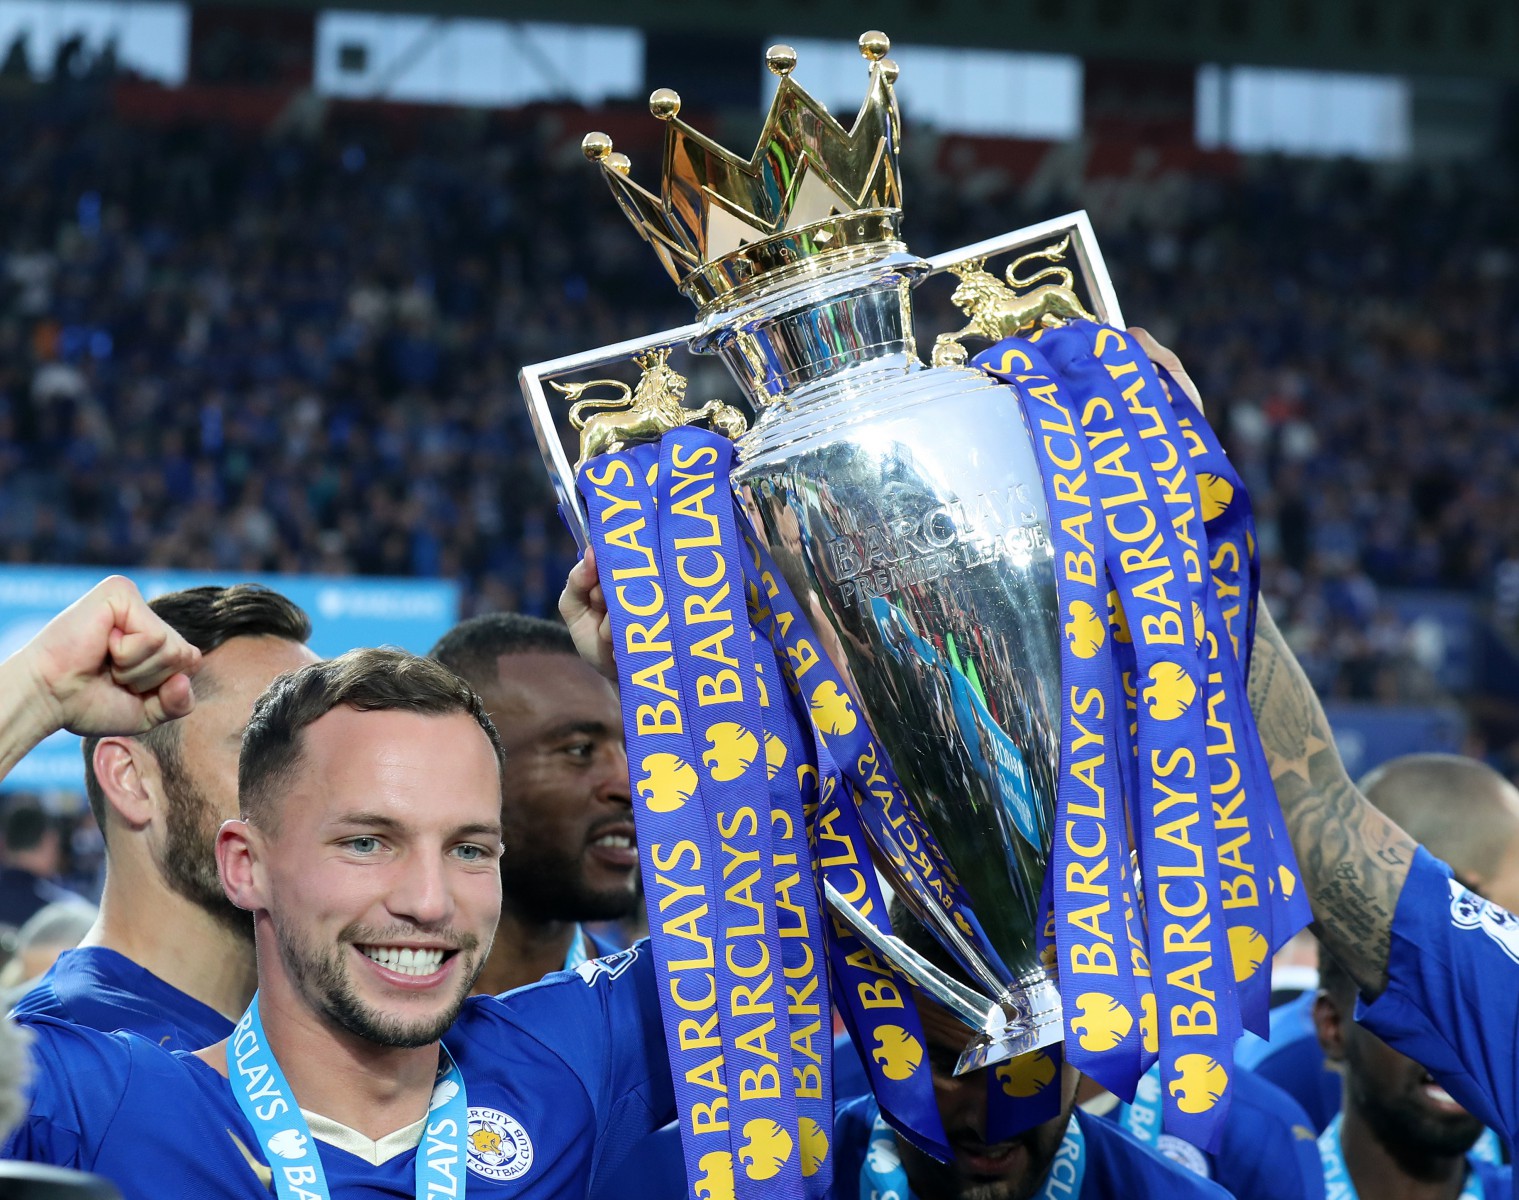 The midfielder, 29, was a crucial member of Leicester's stunning title win in 2015/16